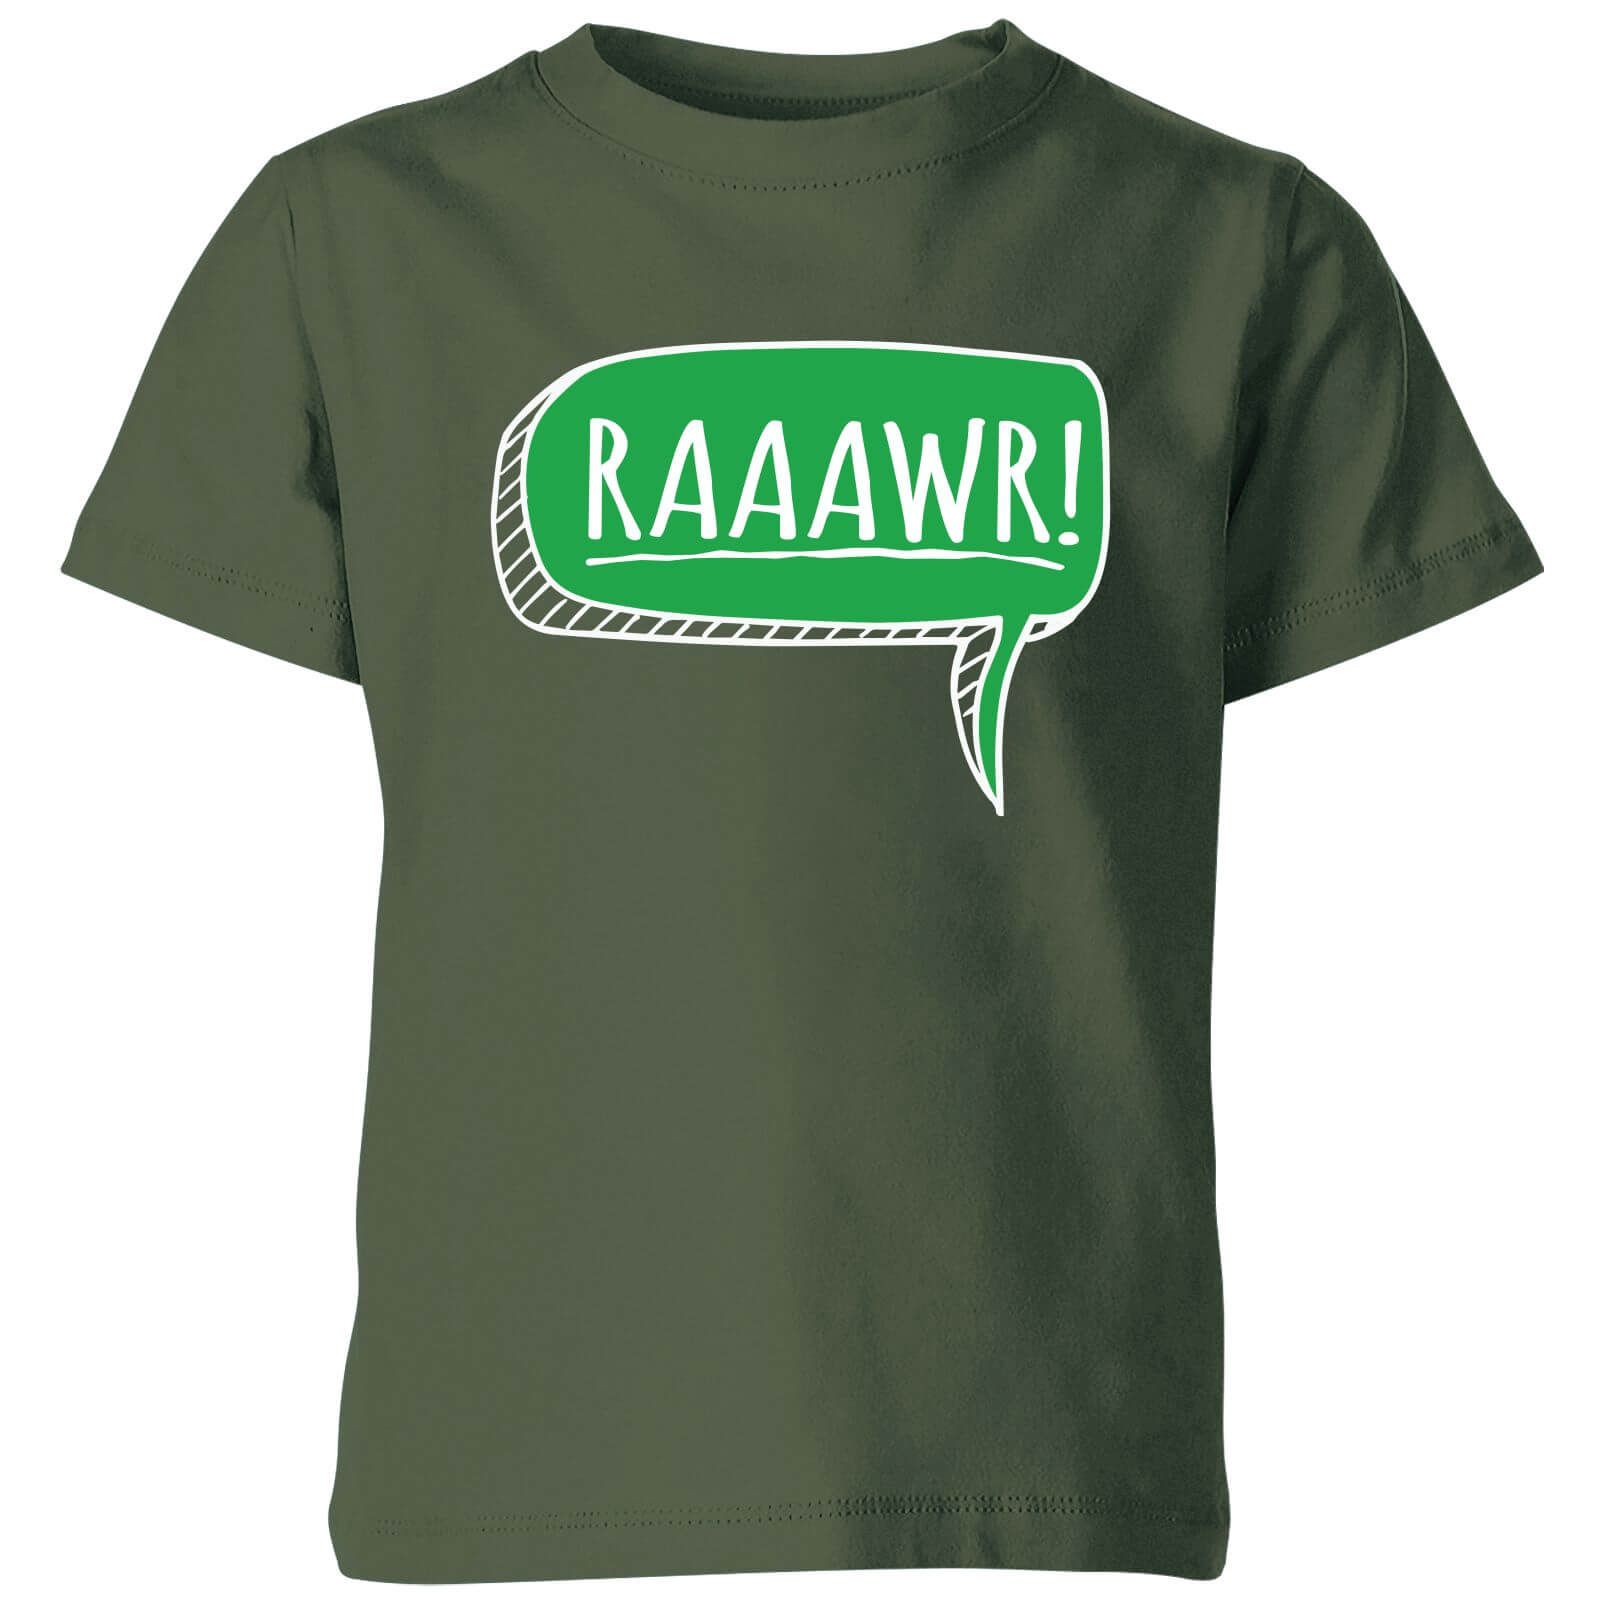 Raaawr Kids' T-Shirt - Forest Green - 3-4 Years - Forest Green